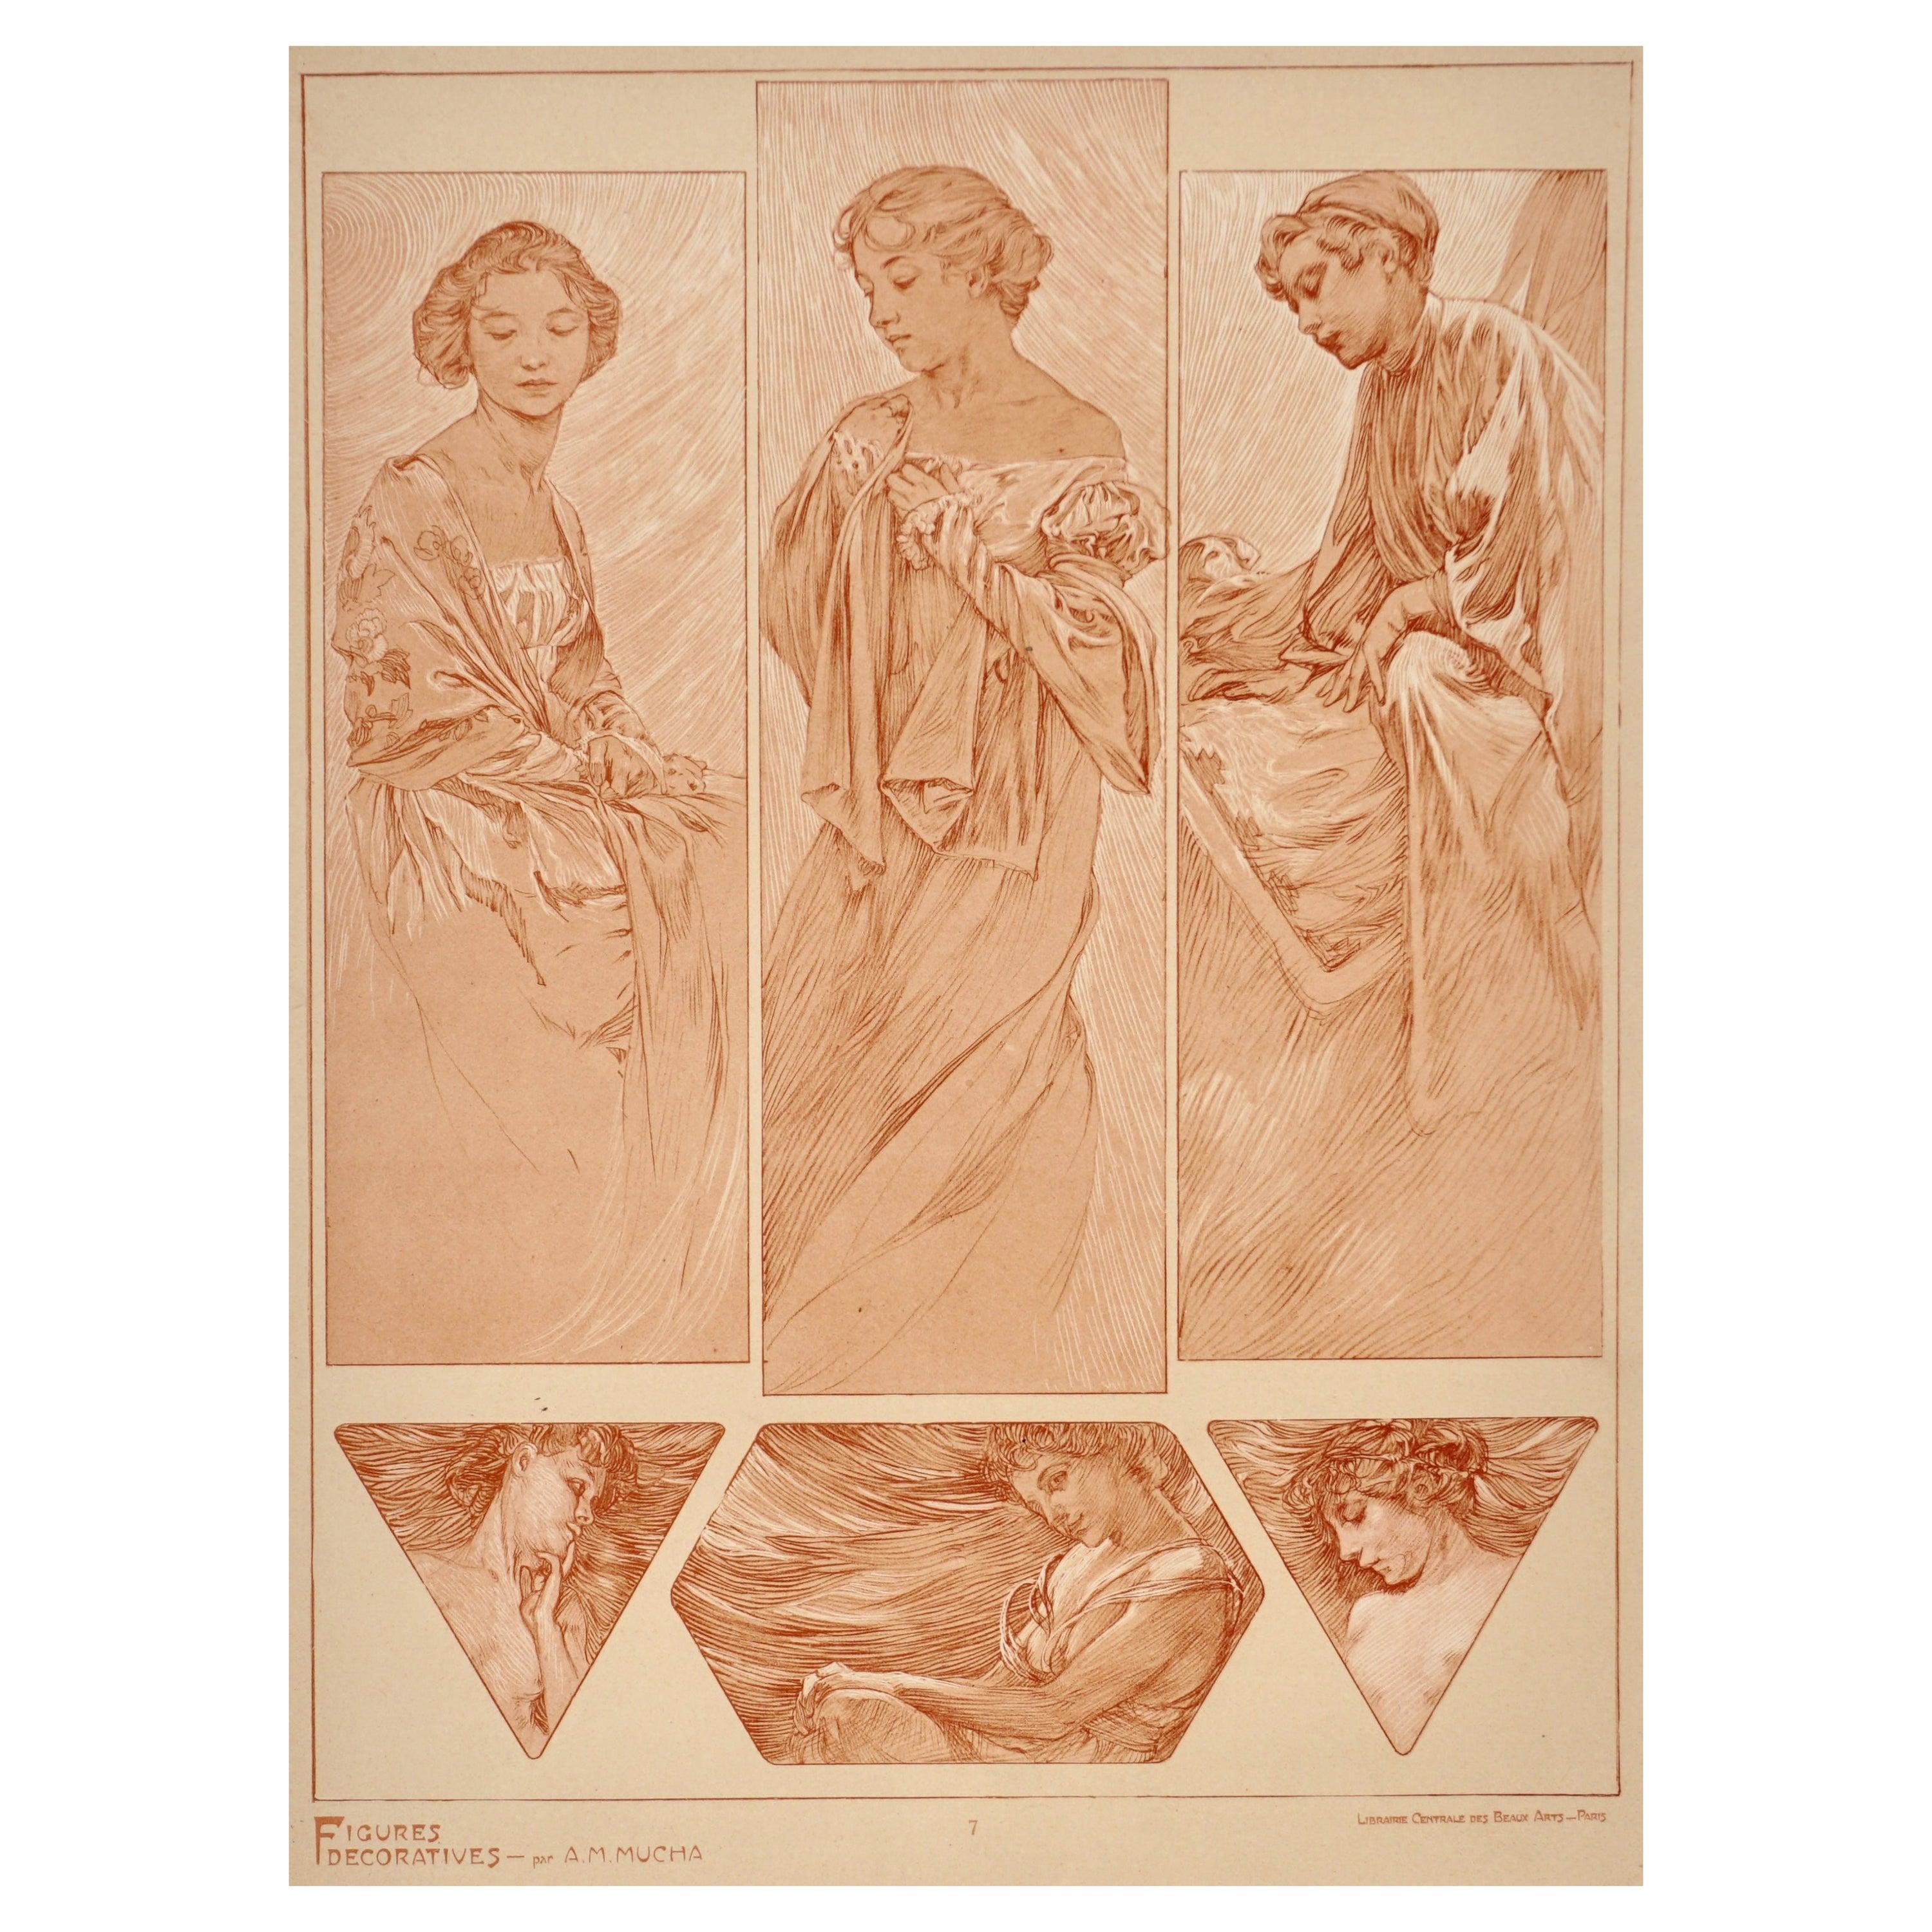 A framed Art Nouveau lithograph collotype poster by Alphone Mucha from 1905 representing the artist’s sketches of nudes, women and beautiful ladies in red umber and white pigments on vellum paper. Plate 7 of “Figures Decoratives par A. M. Mucha,”